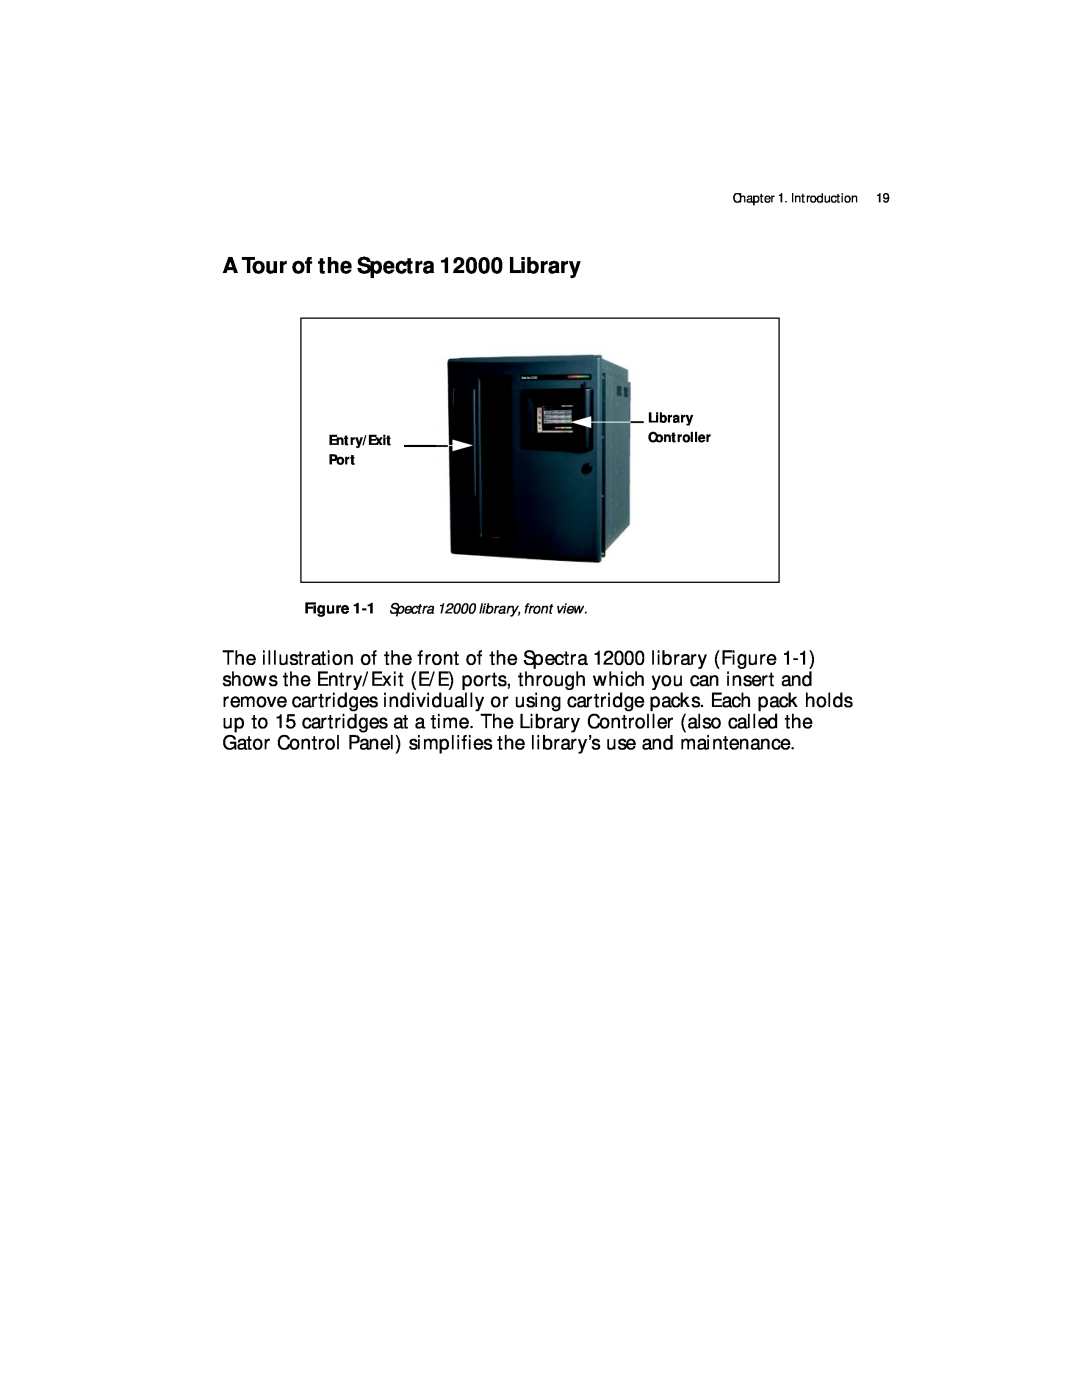 Spectra Logic manual A Tour of the Spectra 12000 Library, 1 Spectra 12000 library, front view 